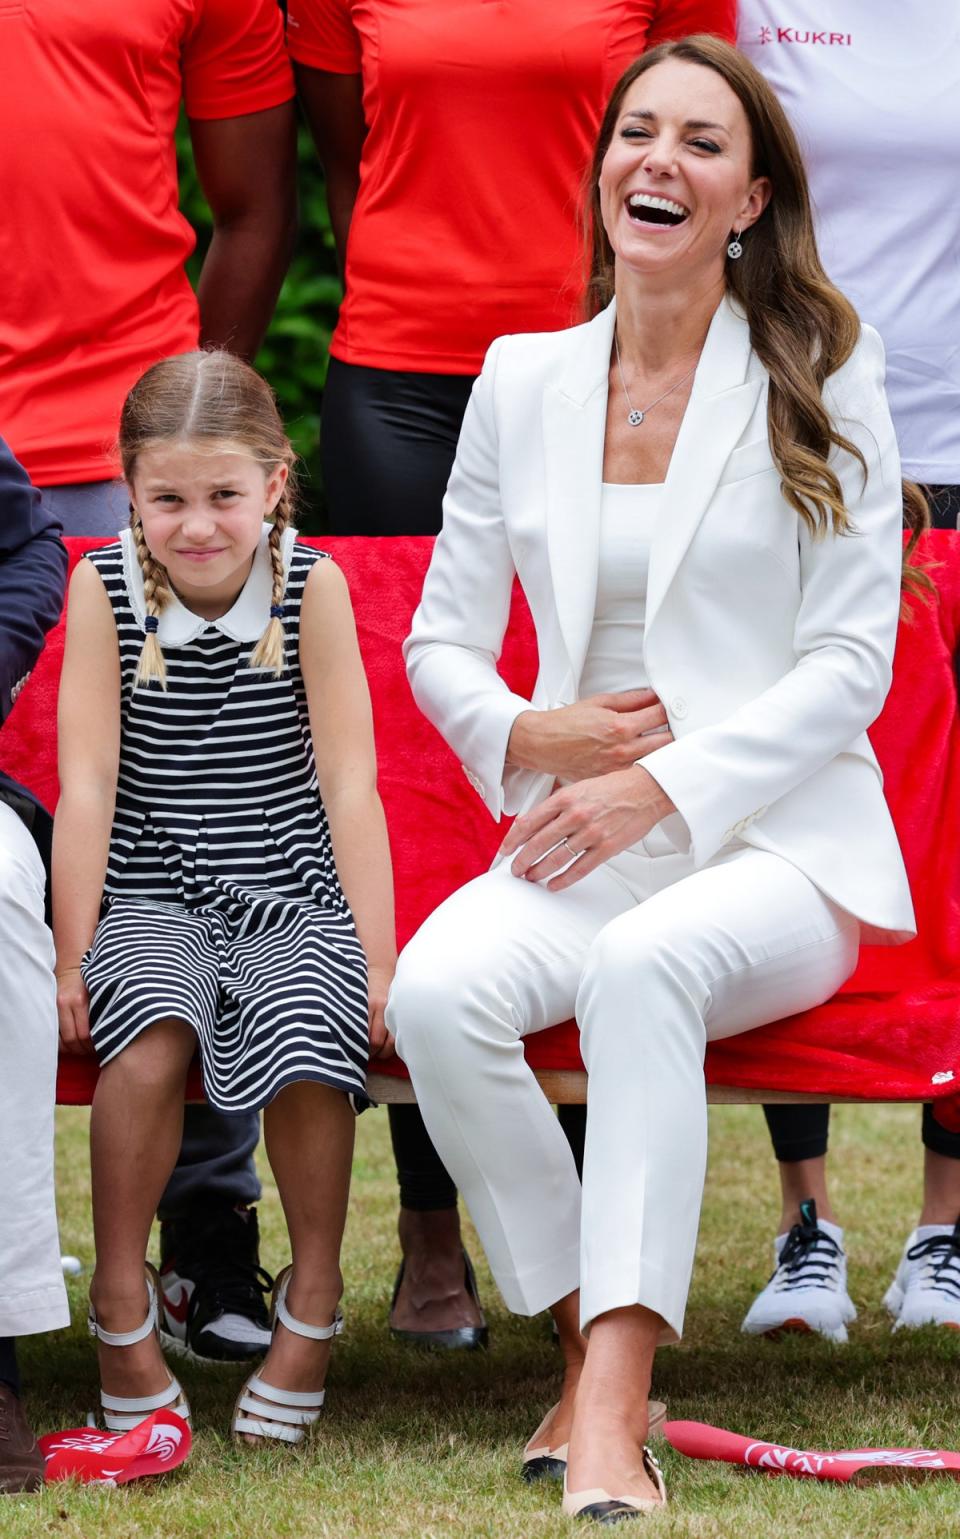 The Duchess of Cambridge and Princess Charlotte at the Commonwealth Games the Birmingham 2022 (Chris Jackon/PA) (PA Wire)